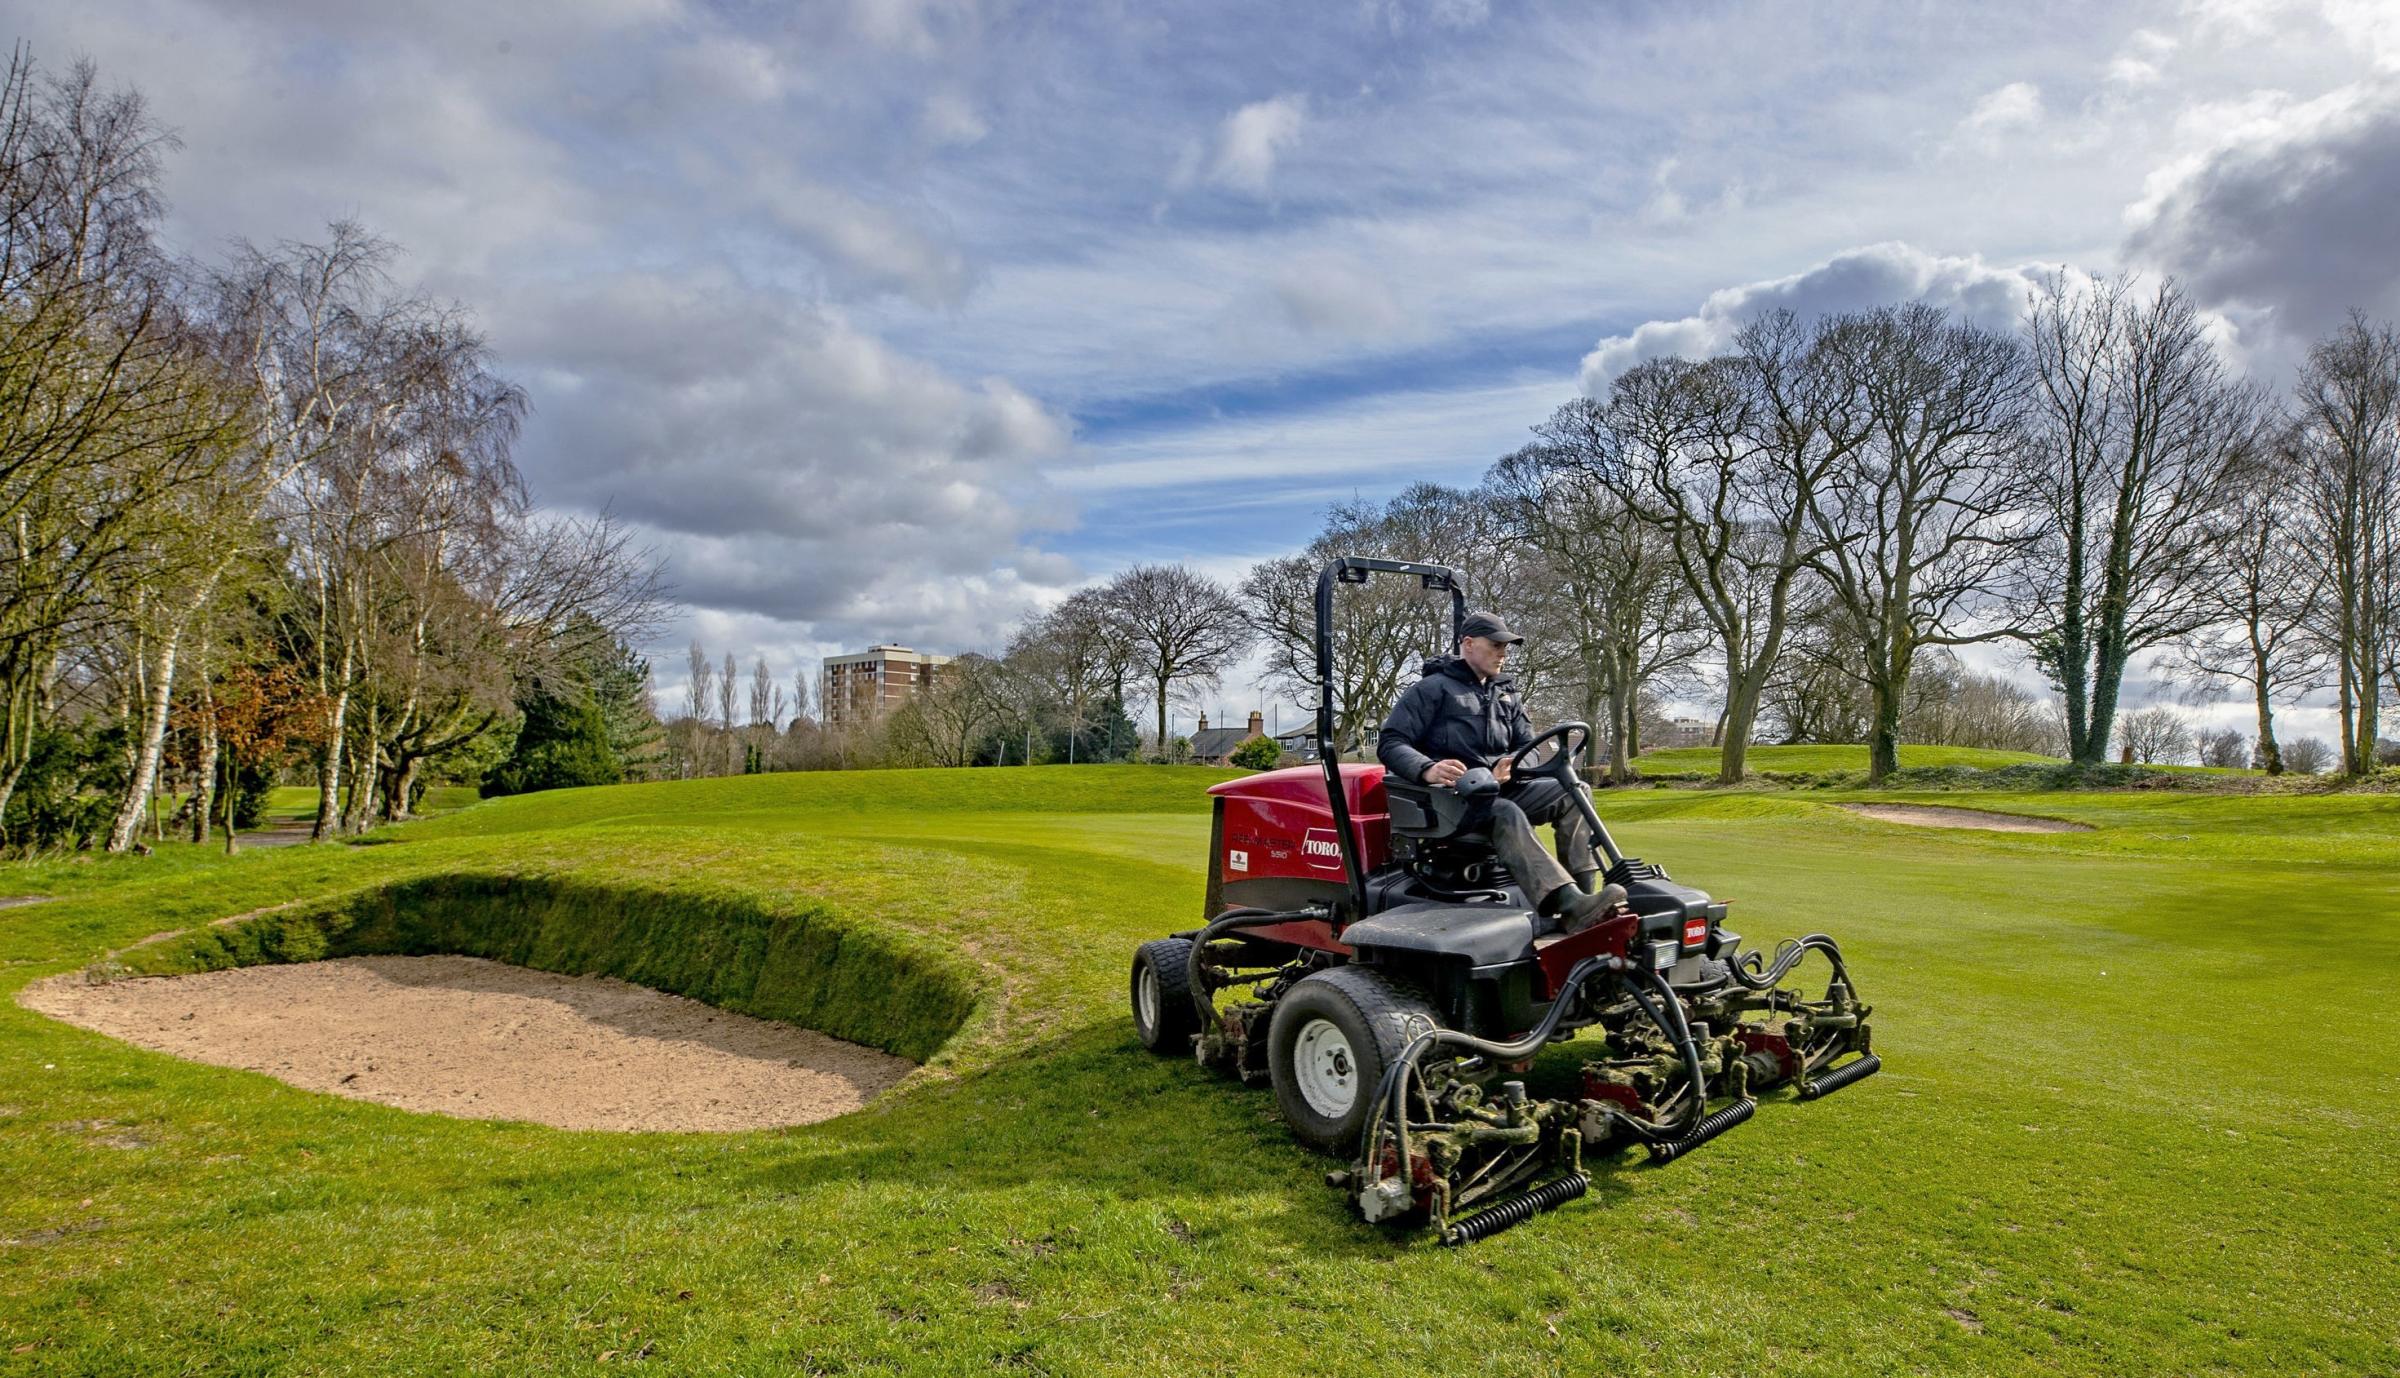 Green Keepers at Allerton Manor golf course in Liverpool prepare the course ahead of reopening on March 29 when further restrictions are eased in England’s third national lockdown Picture: PETER BYRNE/PA